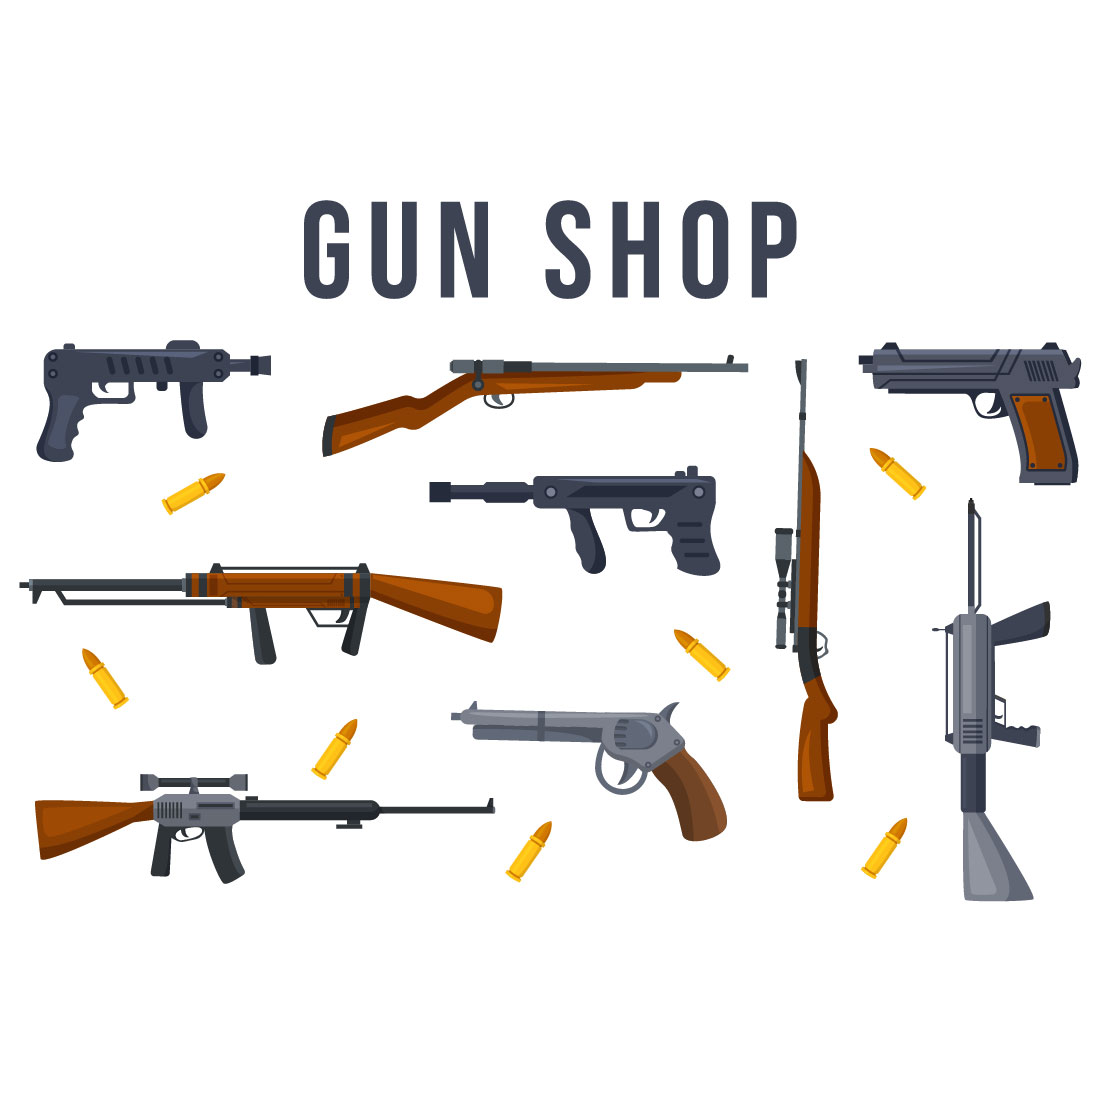 Hunting or Gun Shop Graphics Design cover image.